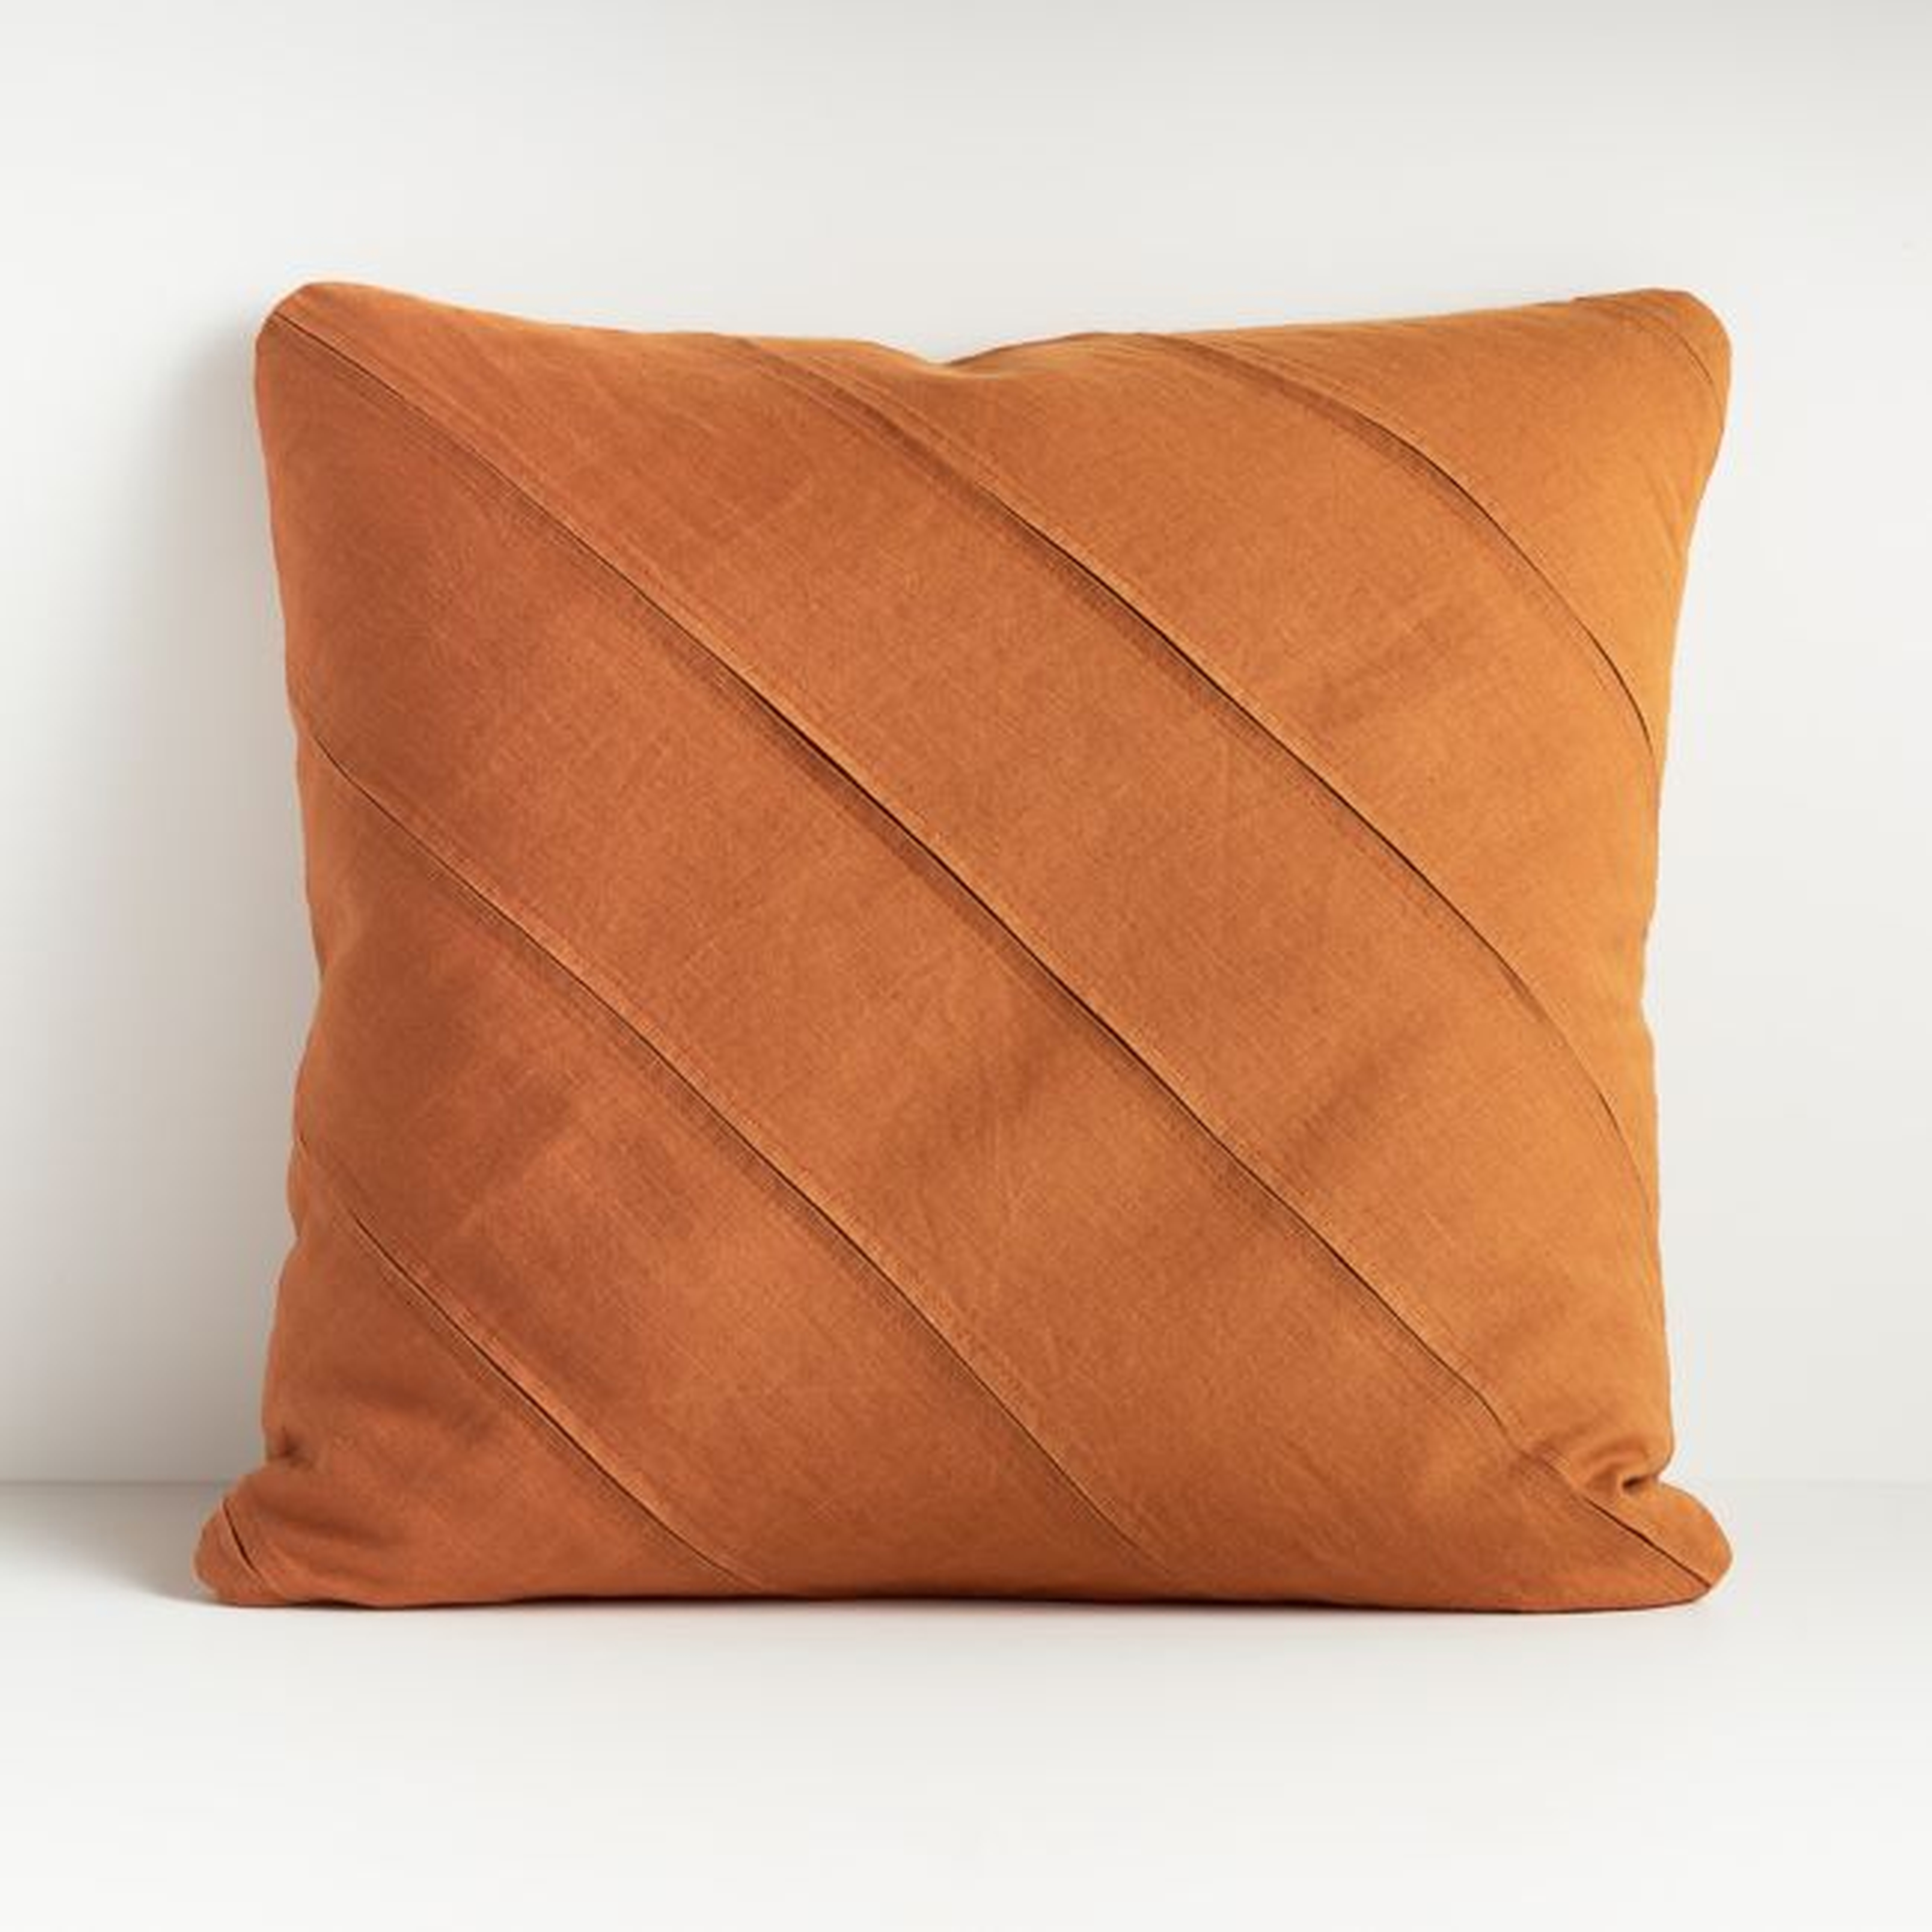 Theta Clay Pillow 20" - down alternative - Crate and Barrel